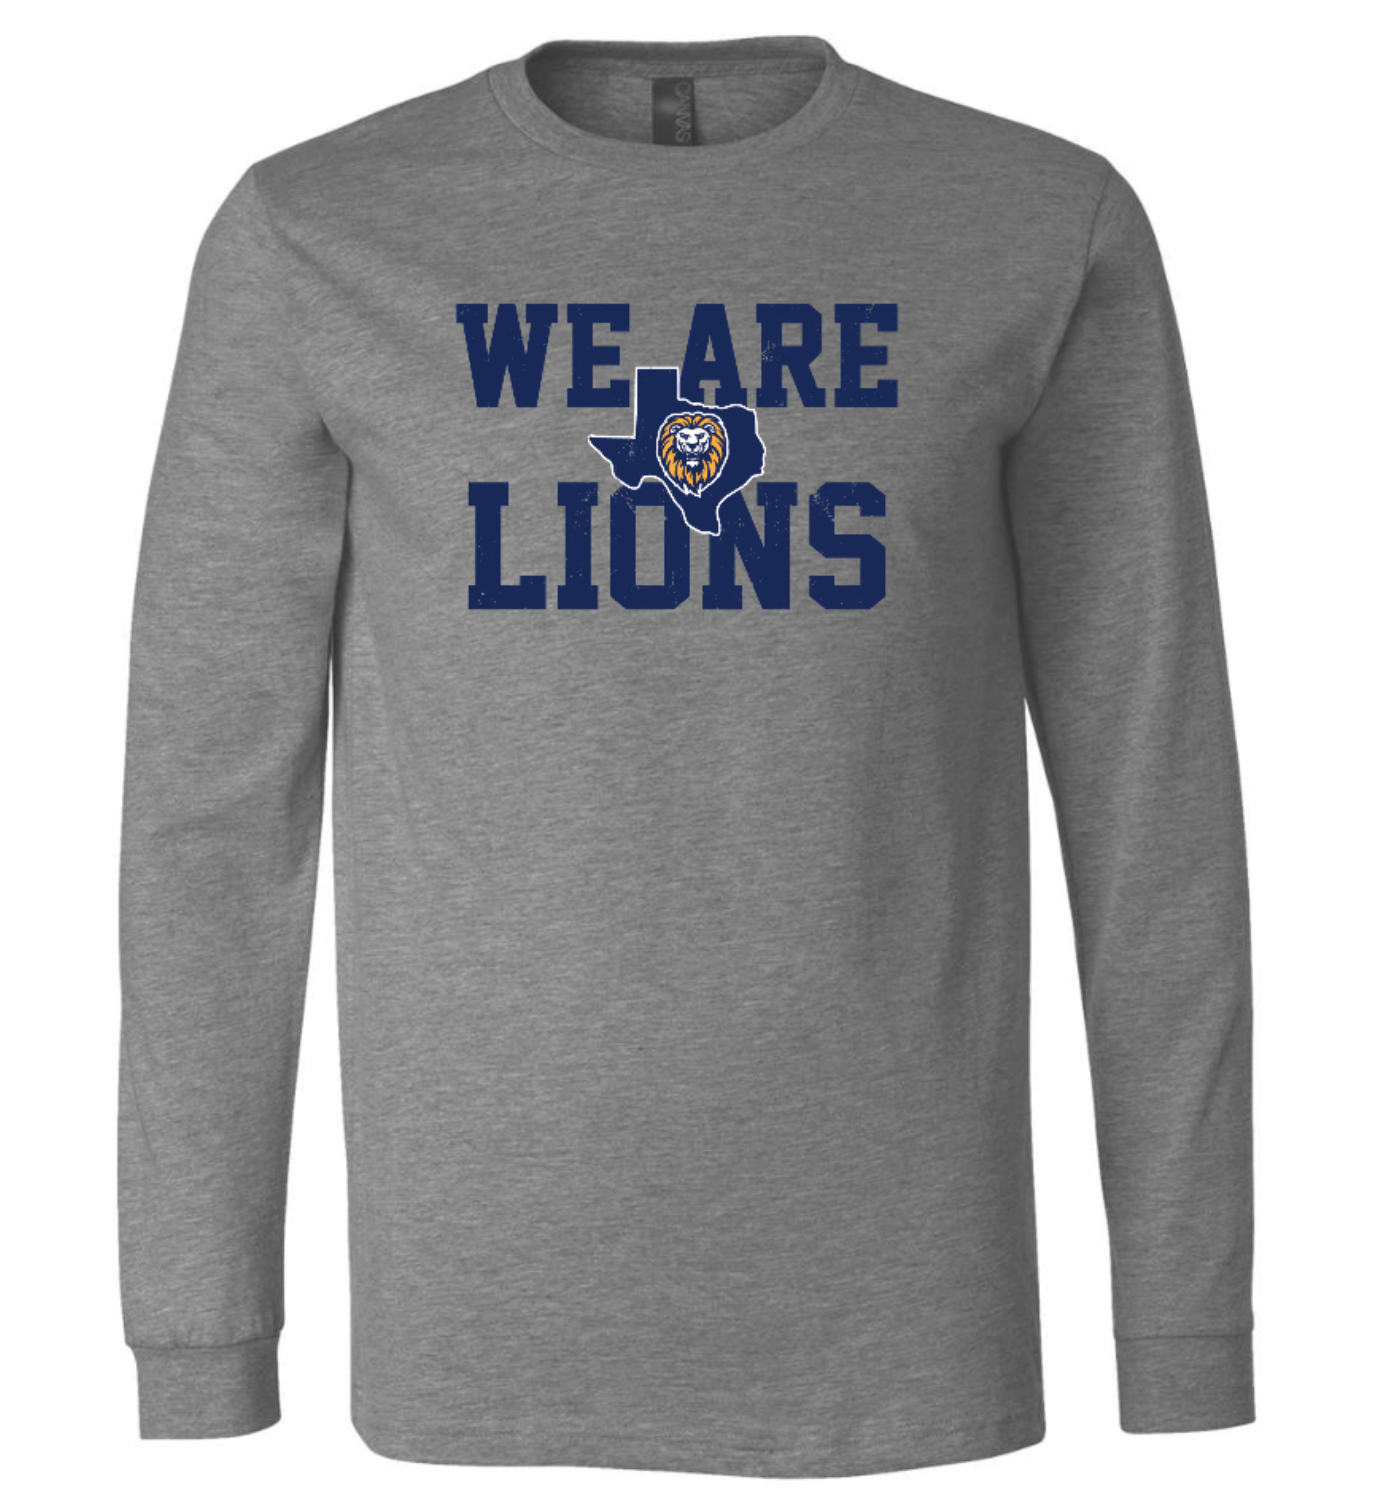 We Are Lions Long Sleeve Shirt